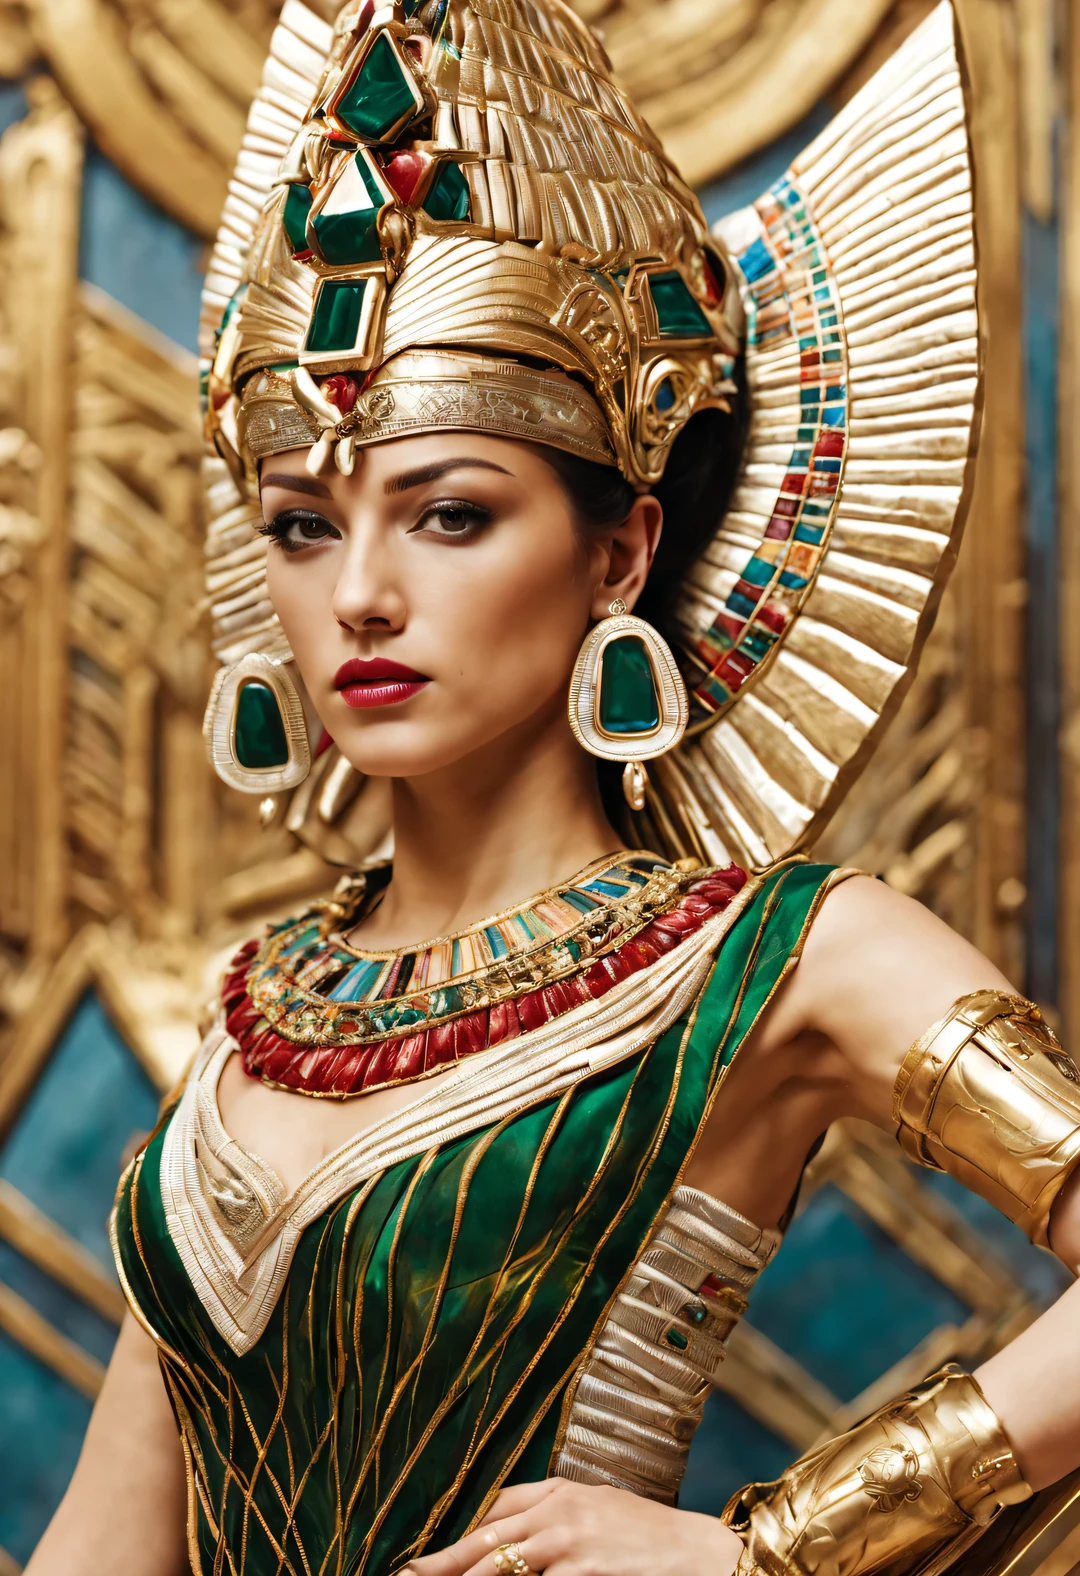 ultra high definition, masterpiece, Accurate, Super details, high detail, high quality, Award-winning, best quality, Level, 16k, background: simple gold,
(an art deco), egyptian style, (Close-up of high heels), white, Red, Dark Green, emerald blue,
There are beautiful pyramids here, the sphinx, and symbol of sun god,